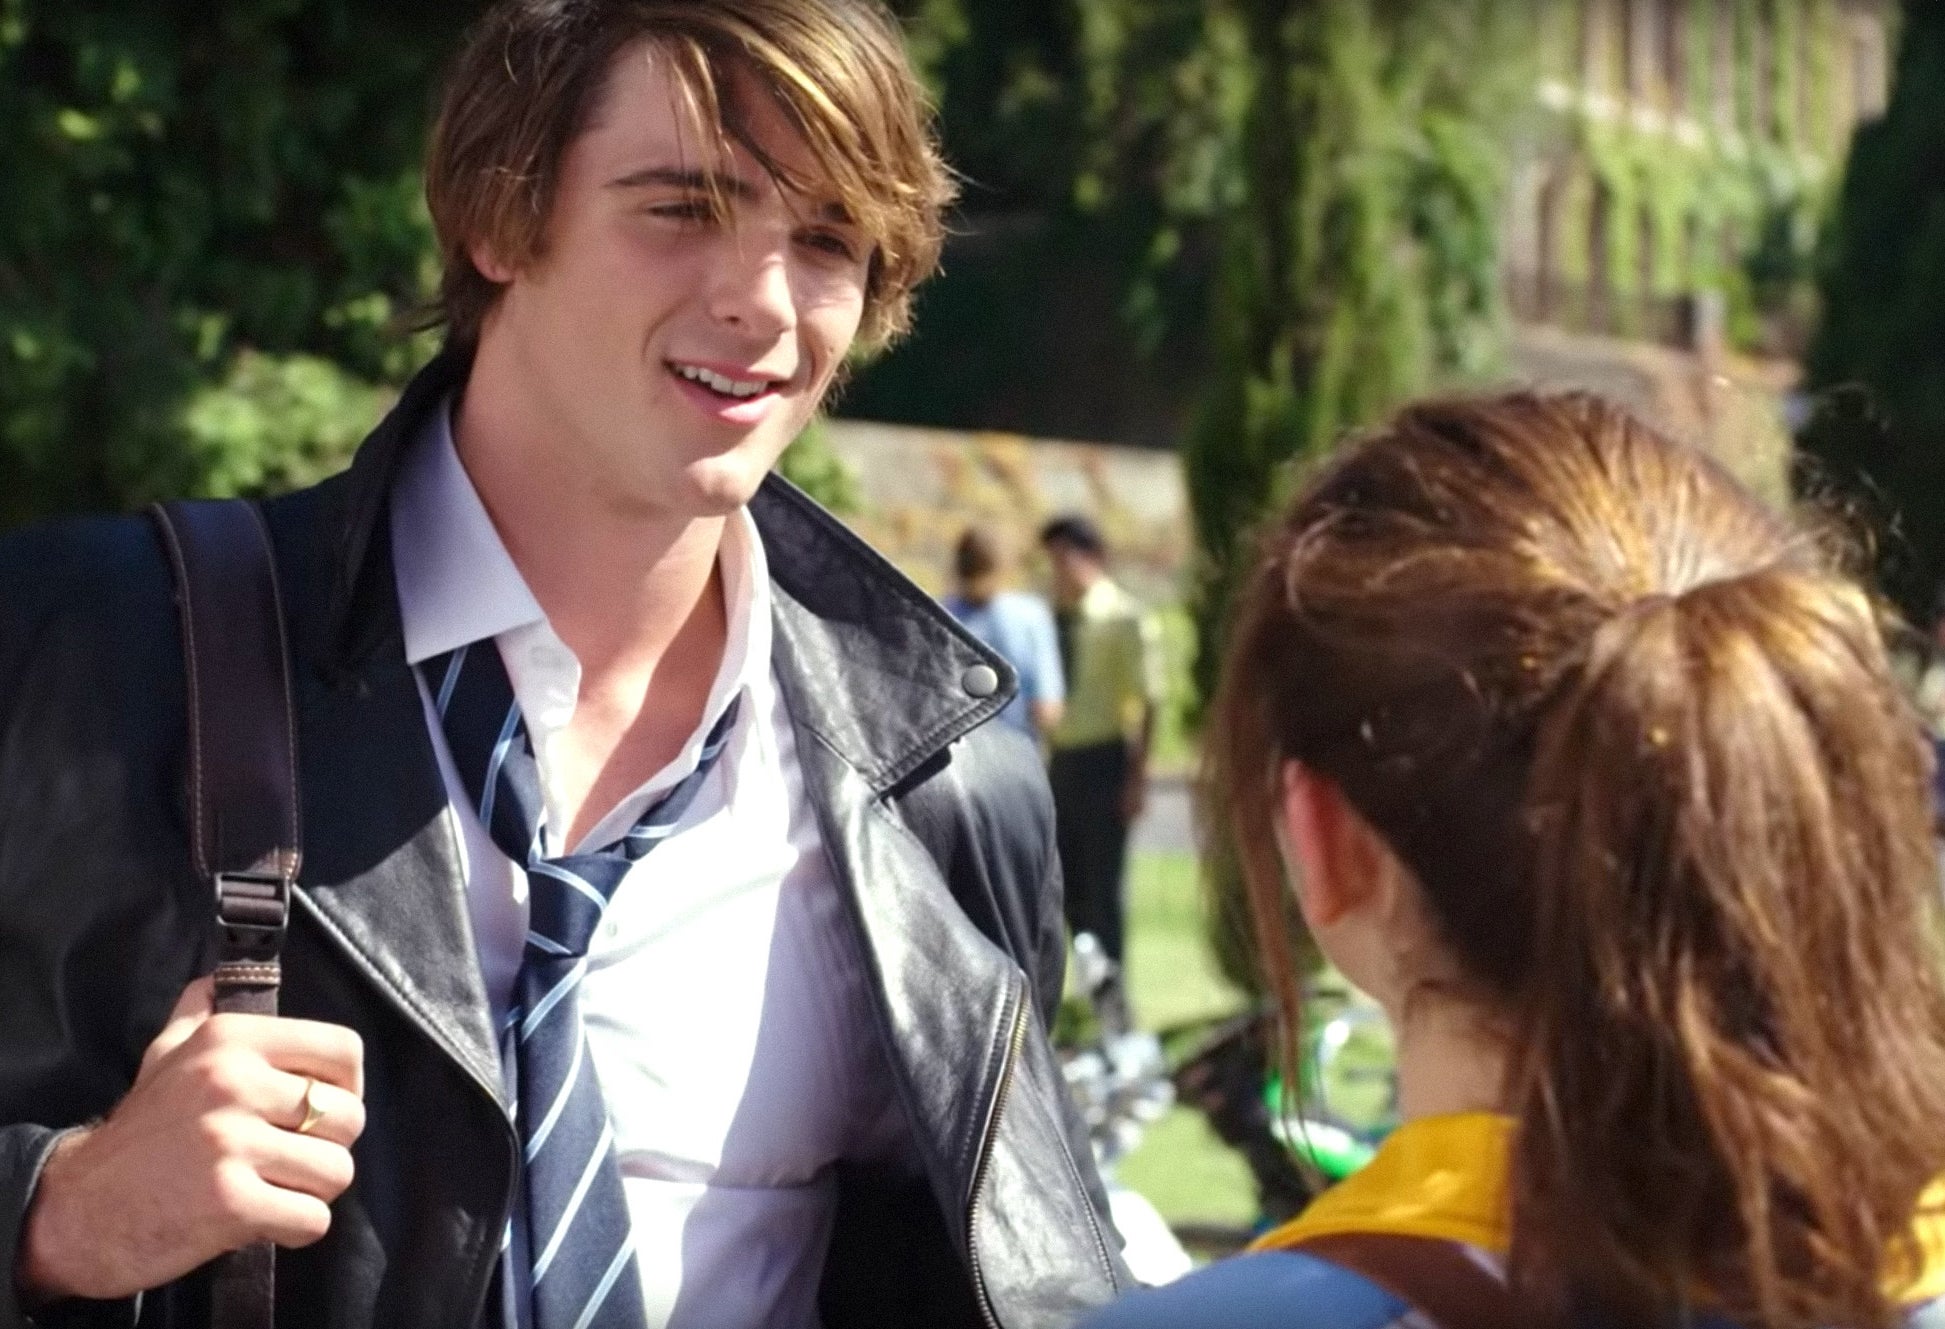 Jacob Elordi smiling and talknig to a girl on campus in &quot;The Kissing Booth&quot;